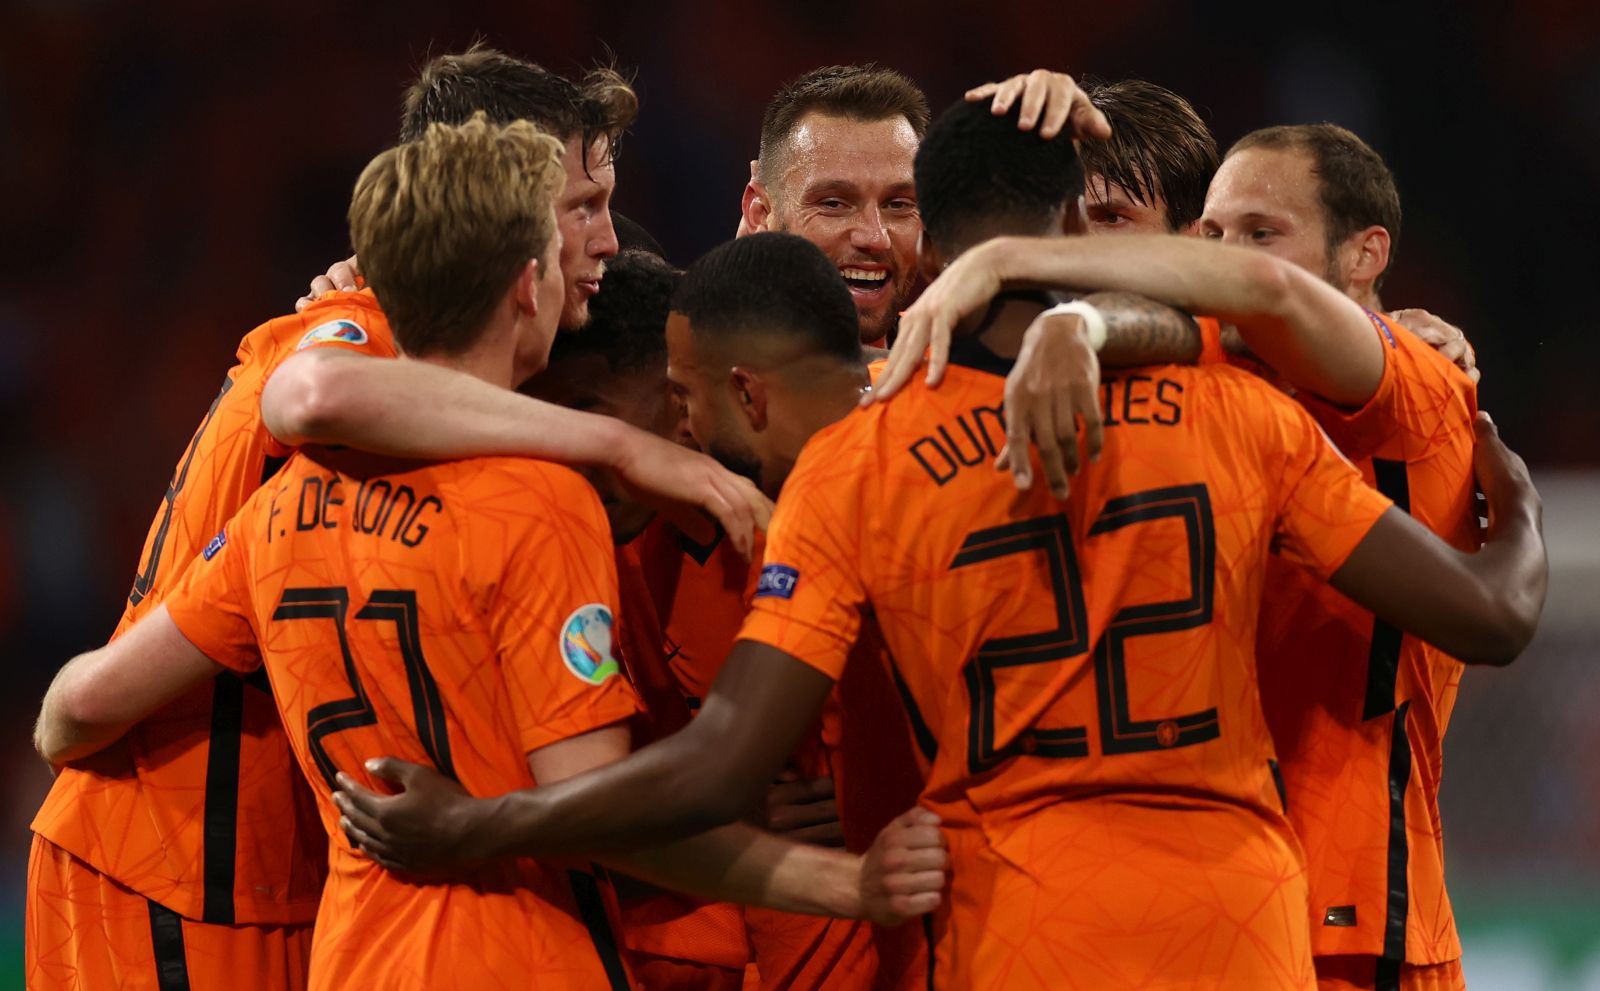 epa09268927 Wout Weghorst (L) of the Netherlands celebrates with teammates after scoring his team's second goal during the UEFA EURO 2020 preliminary round group C match between the Netherlands and Ukraine in Amsterdam, the Netherlands, 13 June 2021.  EPA/Dean Mouhtaropoulous / POOL (RESTRICTIONS: For editorial news reporting purposes only. Images must appear as still images and must not emulate match action video footage. Photographs published in online publications shall have an interval of at least 20 seconds between the posting.)